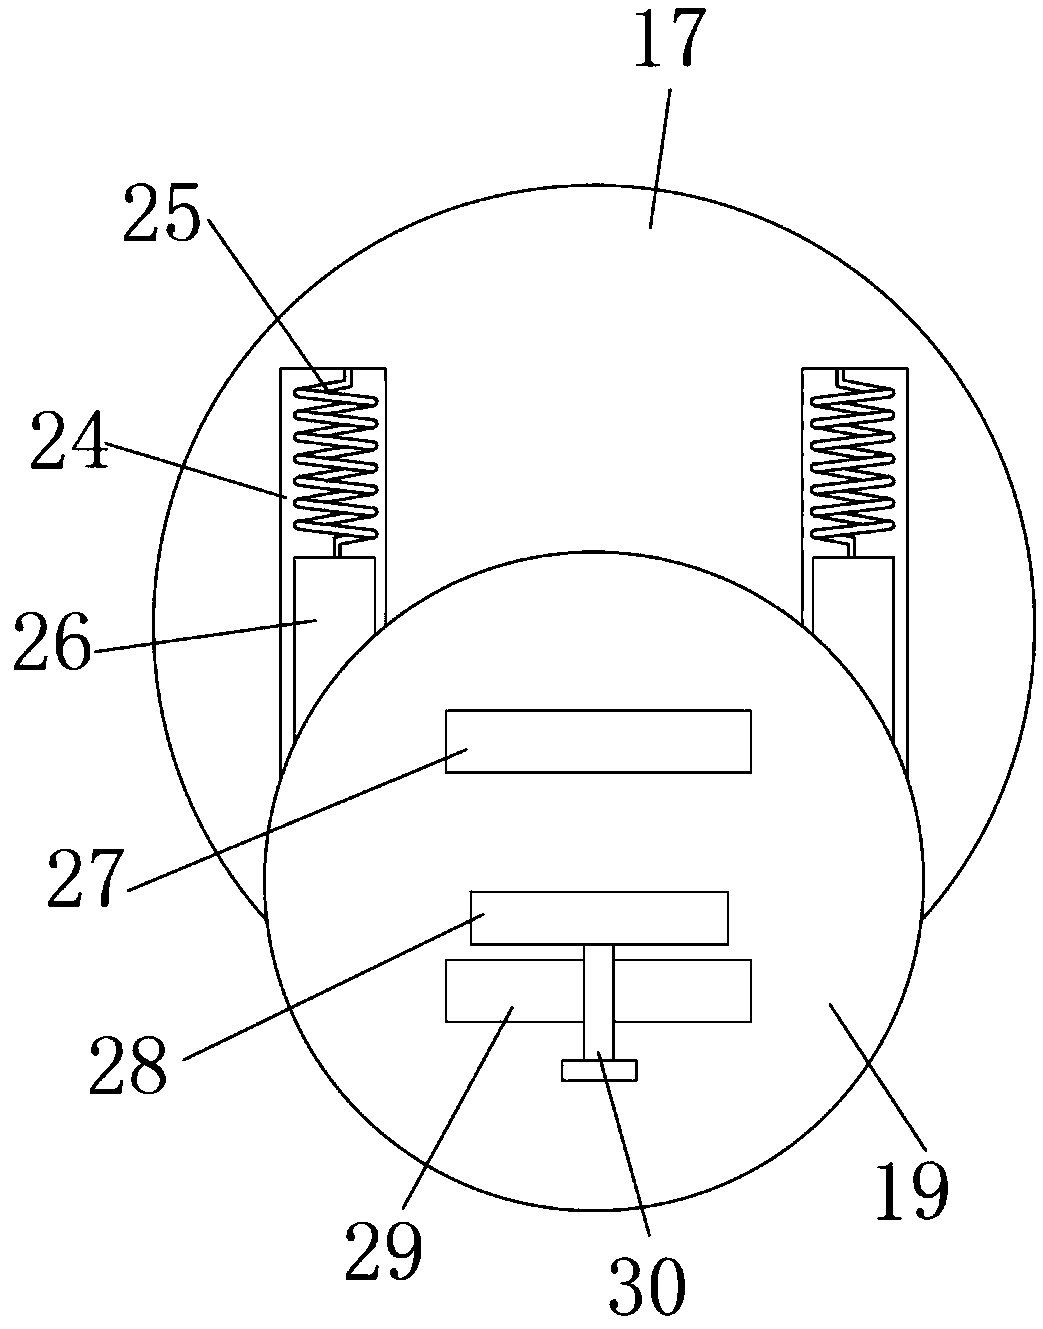 Three-dimensional additive printing and forming device for stereo multi-surface printing of trade marks